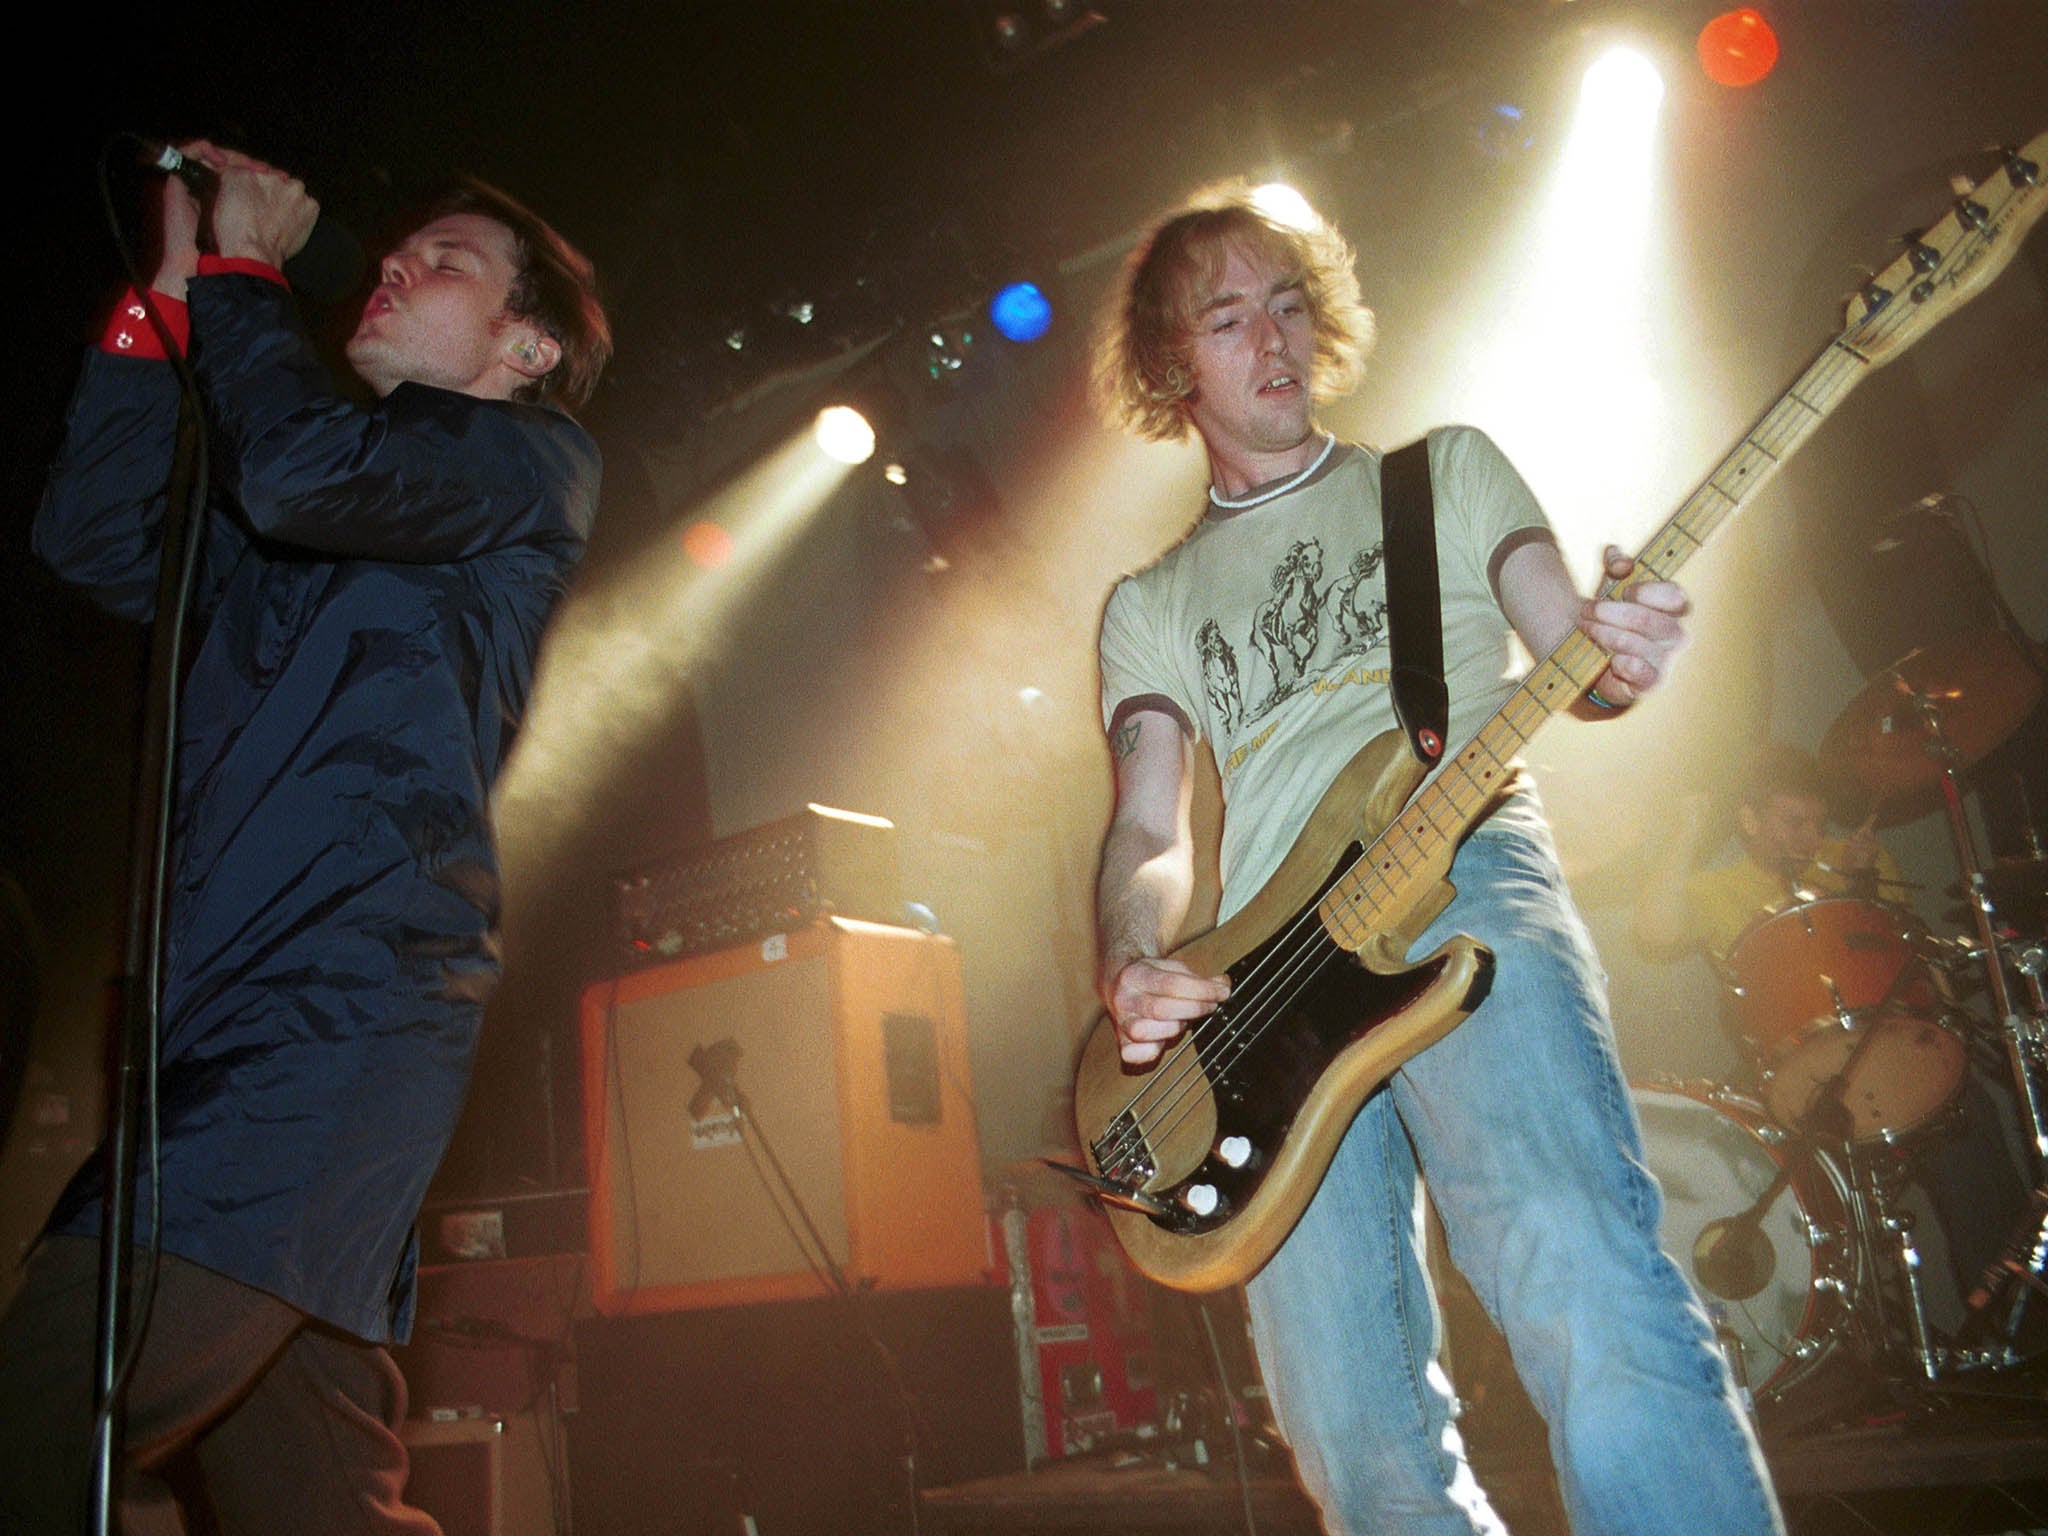 Idlewild performing at Leeds Festival in 2000